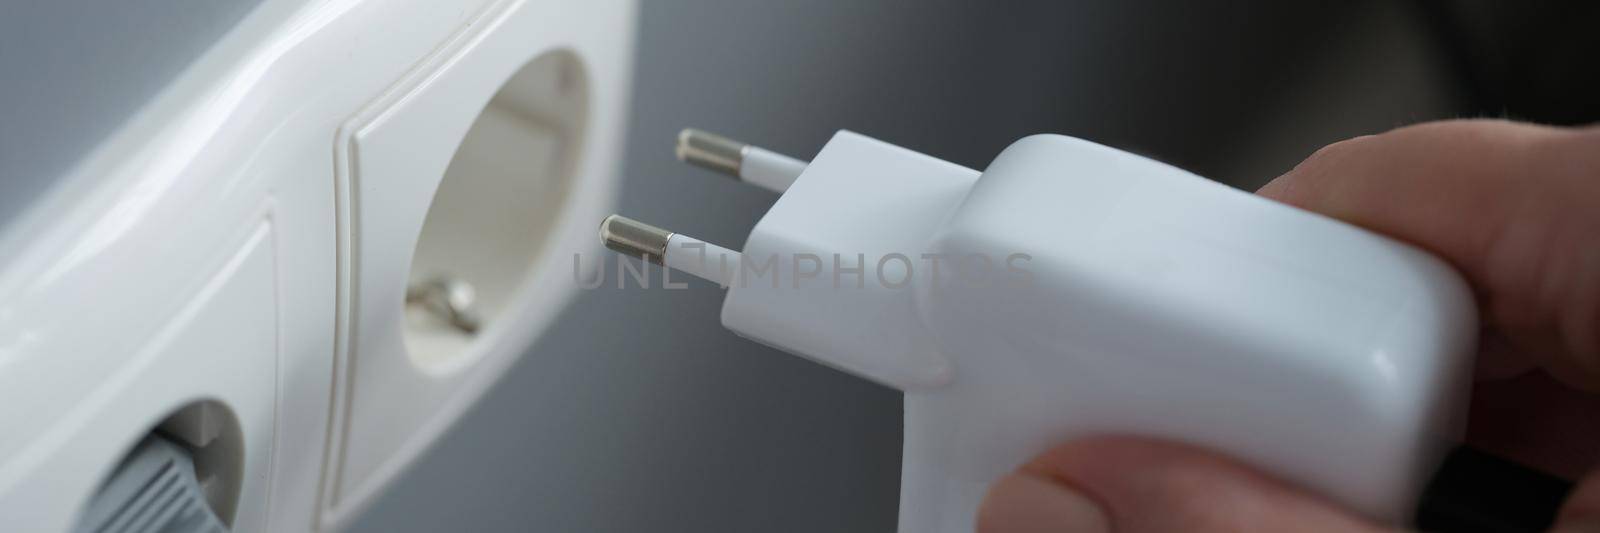 Hands plugging the charger into an outlet in the wall, close-up by kuprevich